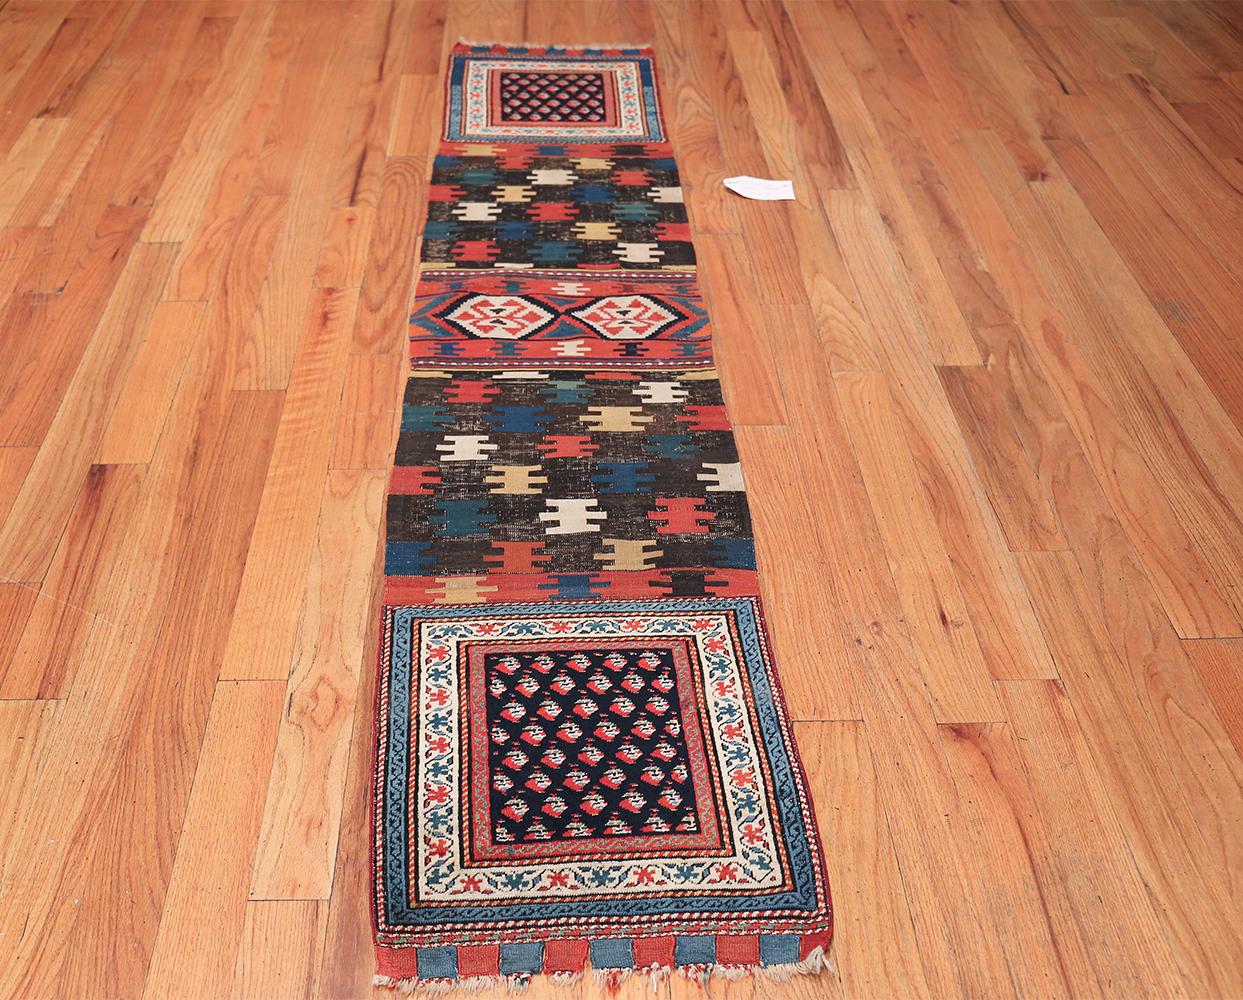 Antique Caucasian Shirvan rug, origin: Caucasus, circa late 19th century. Size: 1 ft 7 in x 7 ft 8 in (0.48 m x 2.34 m)

This enrapturing antique Shirvan rug showcases a beautifully varied and complex composition that incorporates an iconic